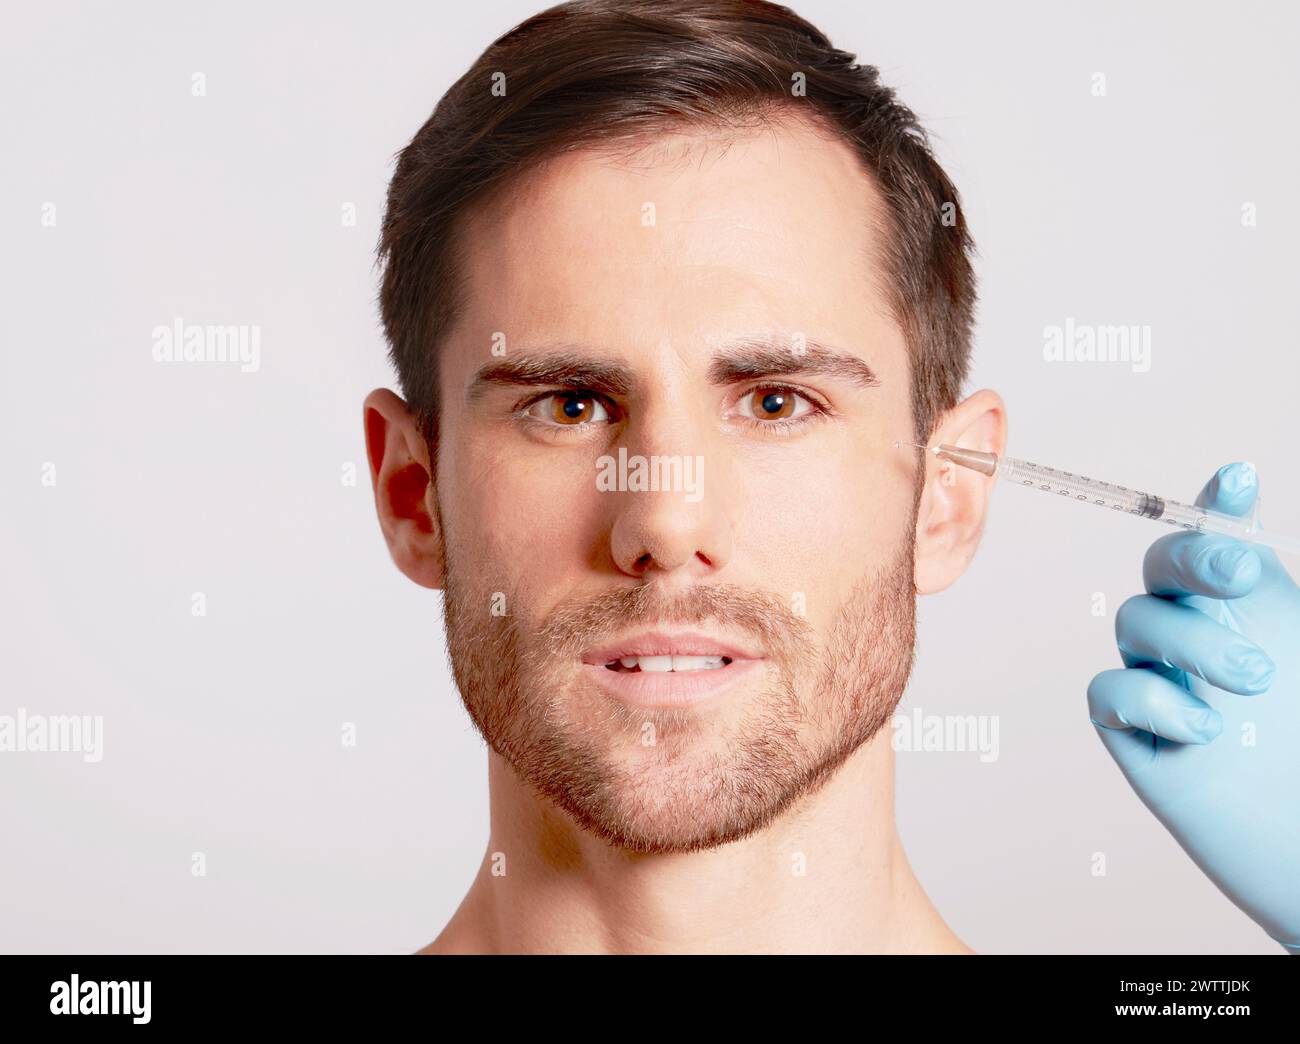 Man receiving injection near the forehead Stock Photo